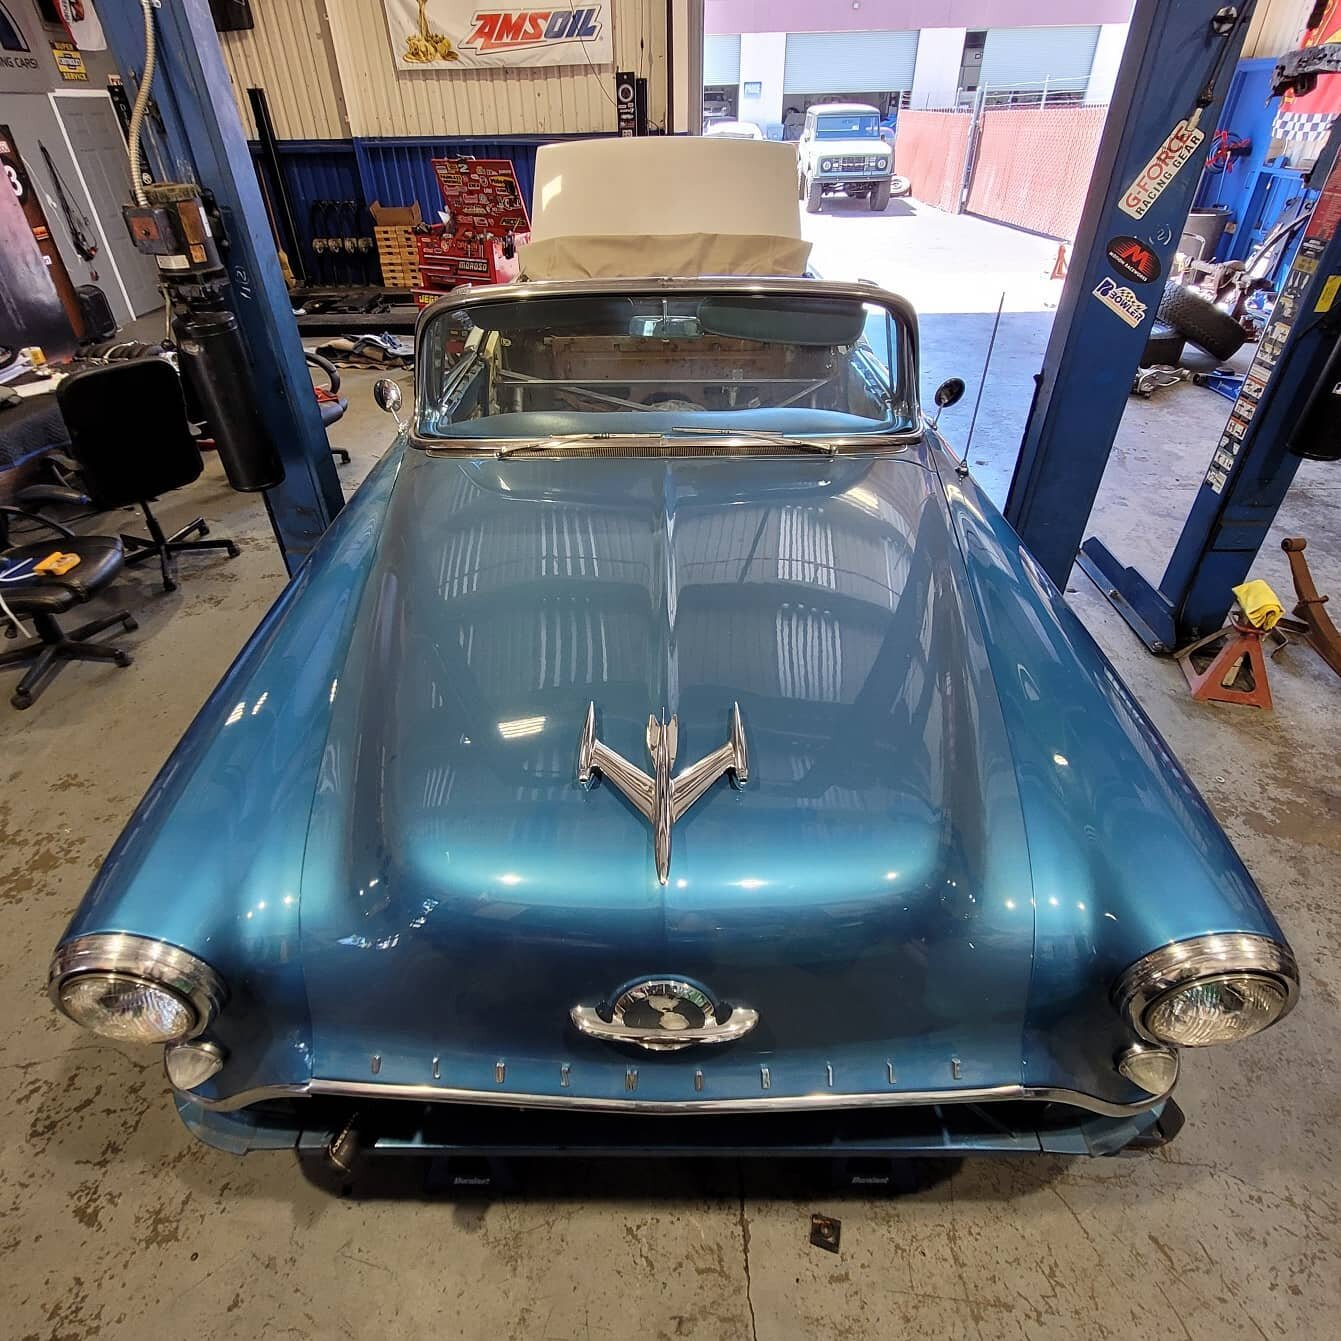 Our good friend @scottbrunshwiler s 1954 Oldsmobile Super 88 is coming along nicely! We just mated this gorgeous @scottshotrods SuperSlam Chassis with &quot;minor&quot; massaging. The P-Ayr Mock Up Motor makes mock up a worry free breeze. Feel free t